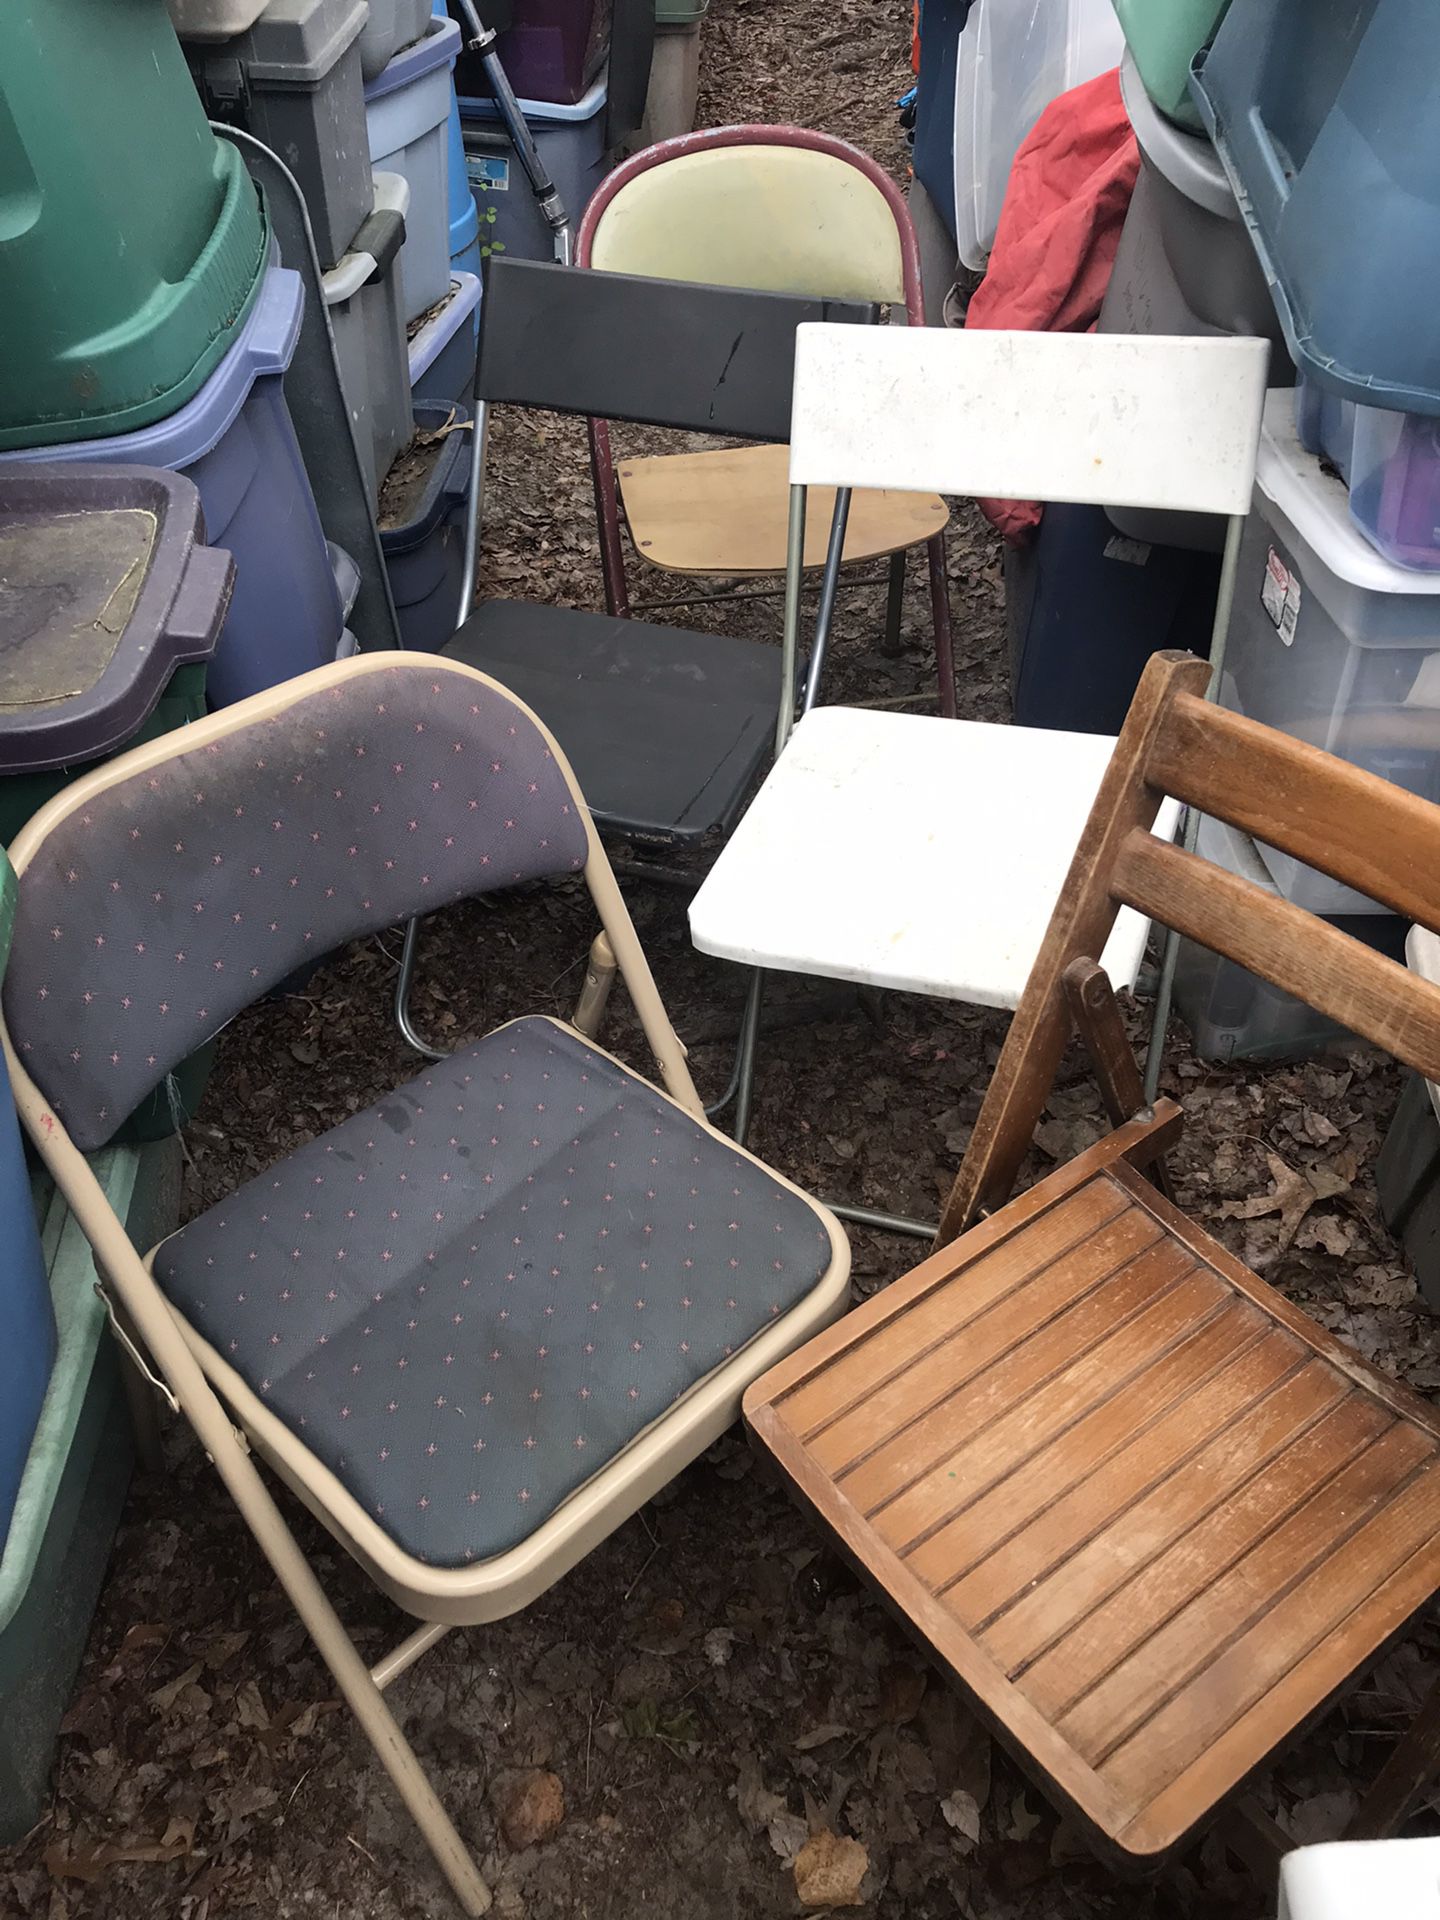 Five Fold Up Chairs Everything Goes For $40 Firm